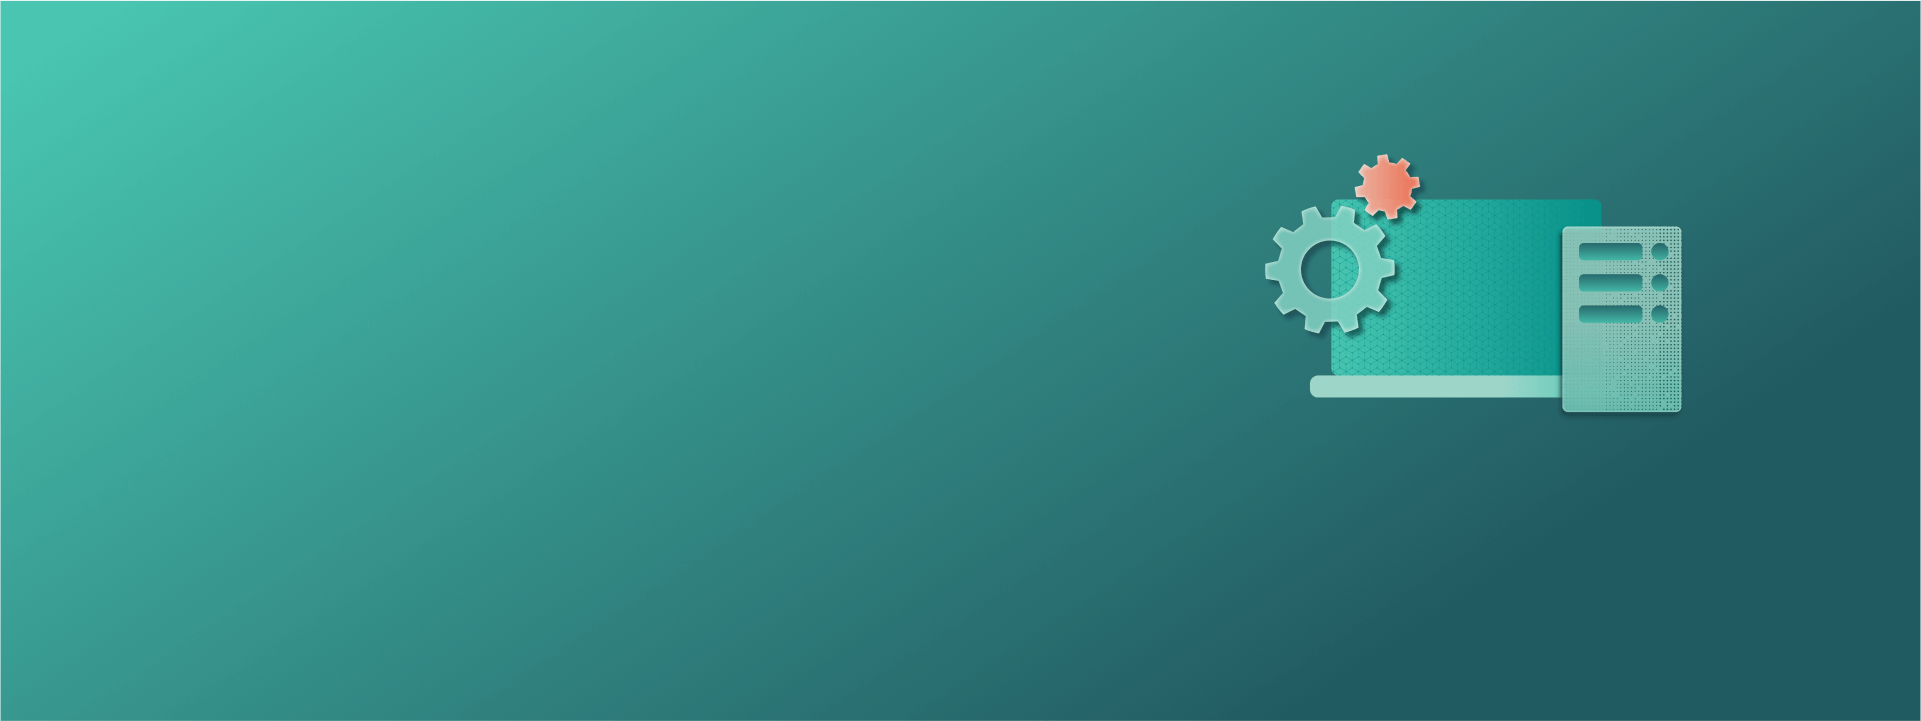 illustration of two gears and a tablet on top of a computer screen on a green gradient background